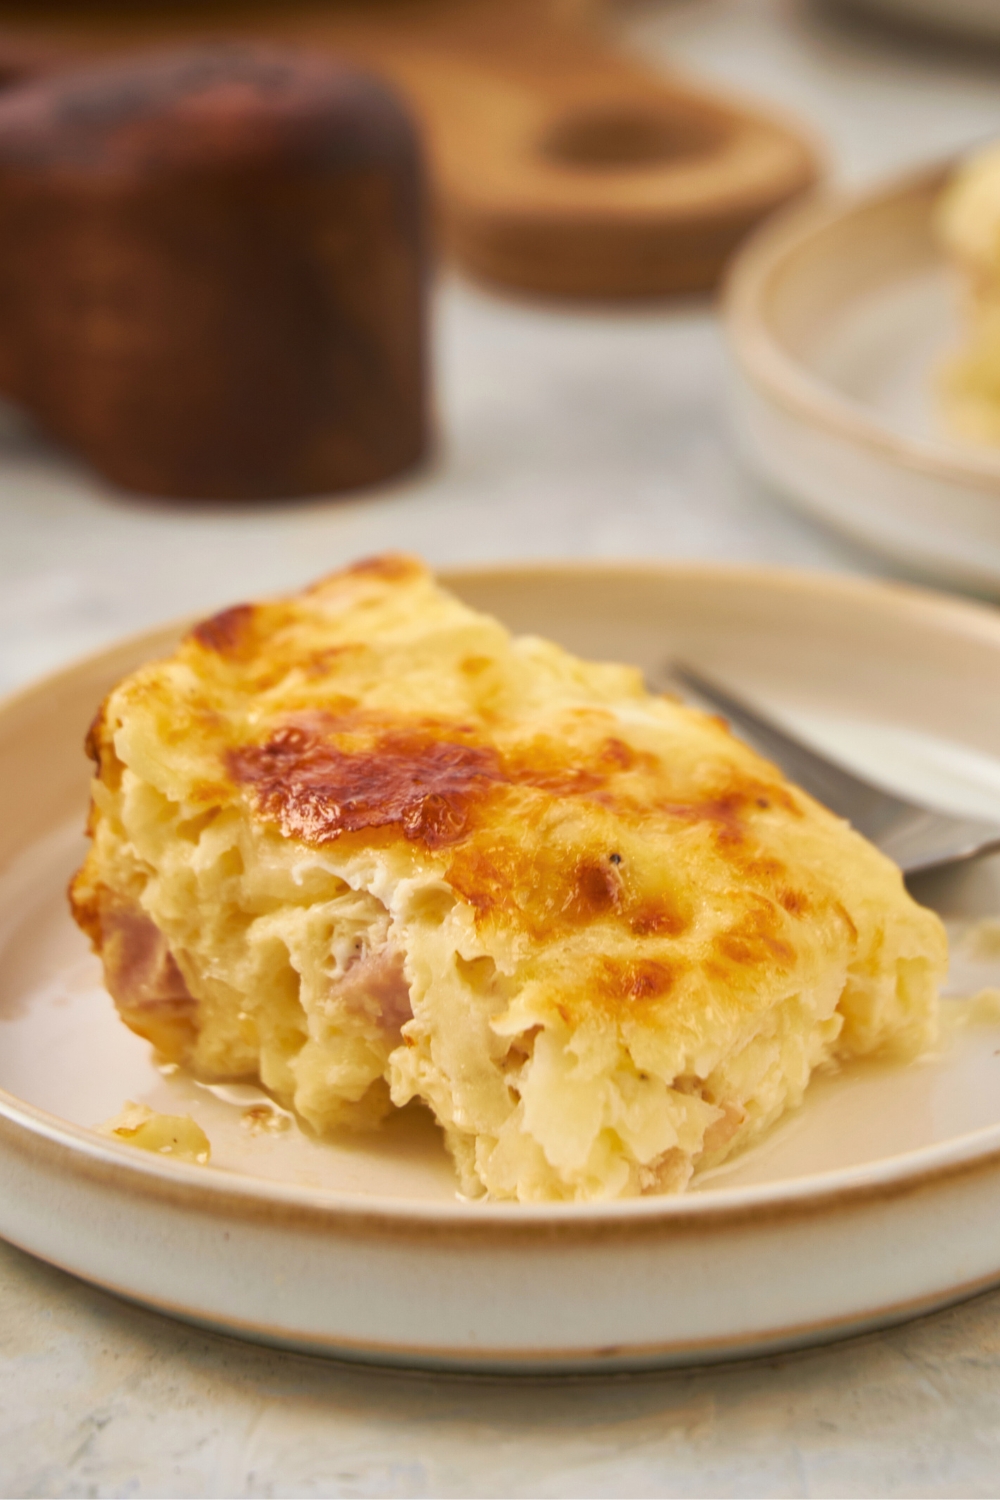 A slice of ham and cheese breakfast casserole on a plate.